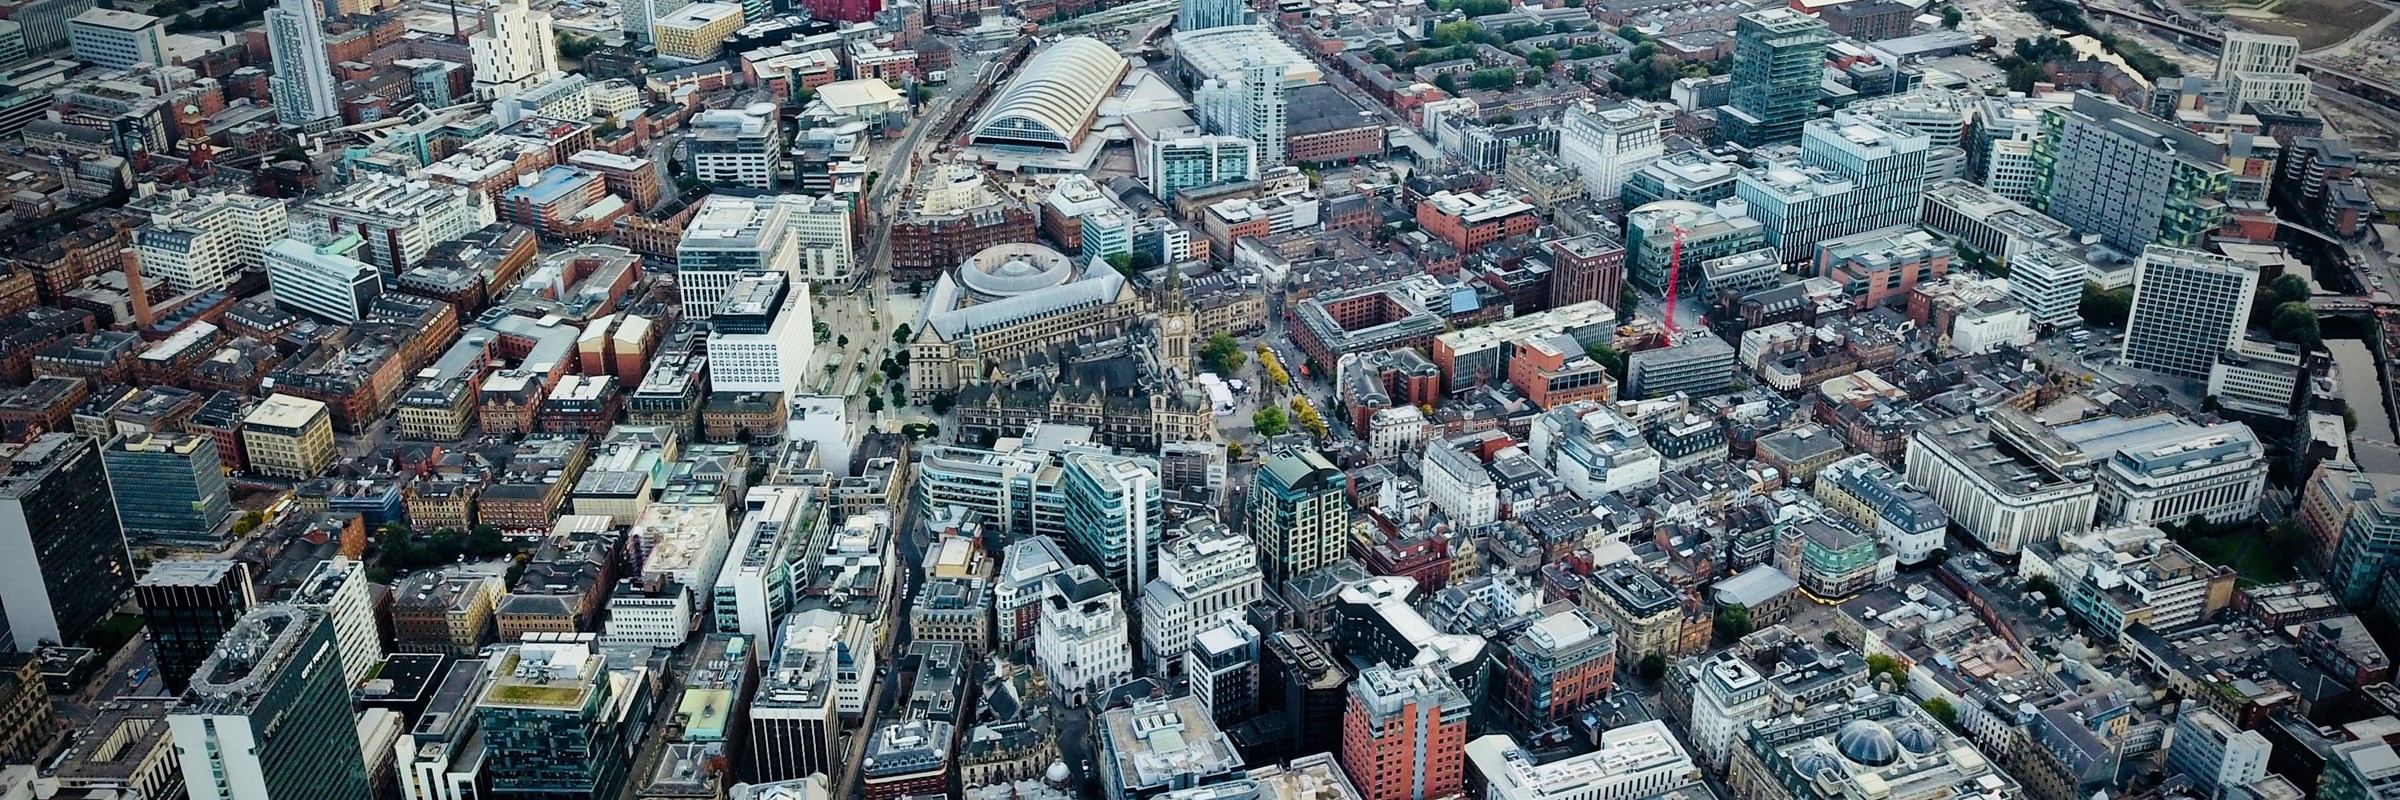 An aerial view of Manchester city centre, showing the buildings from above